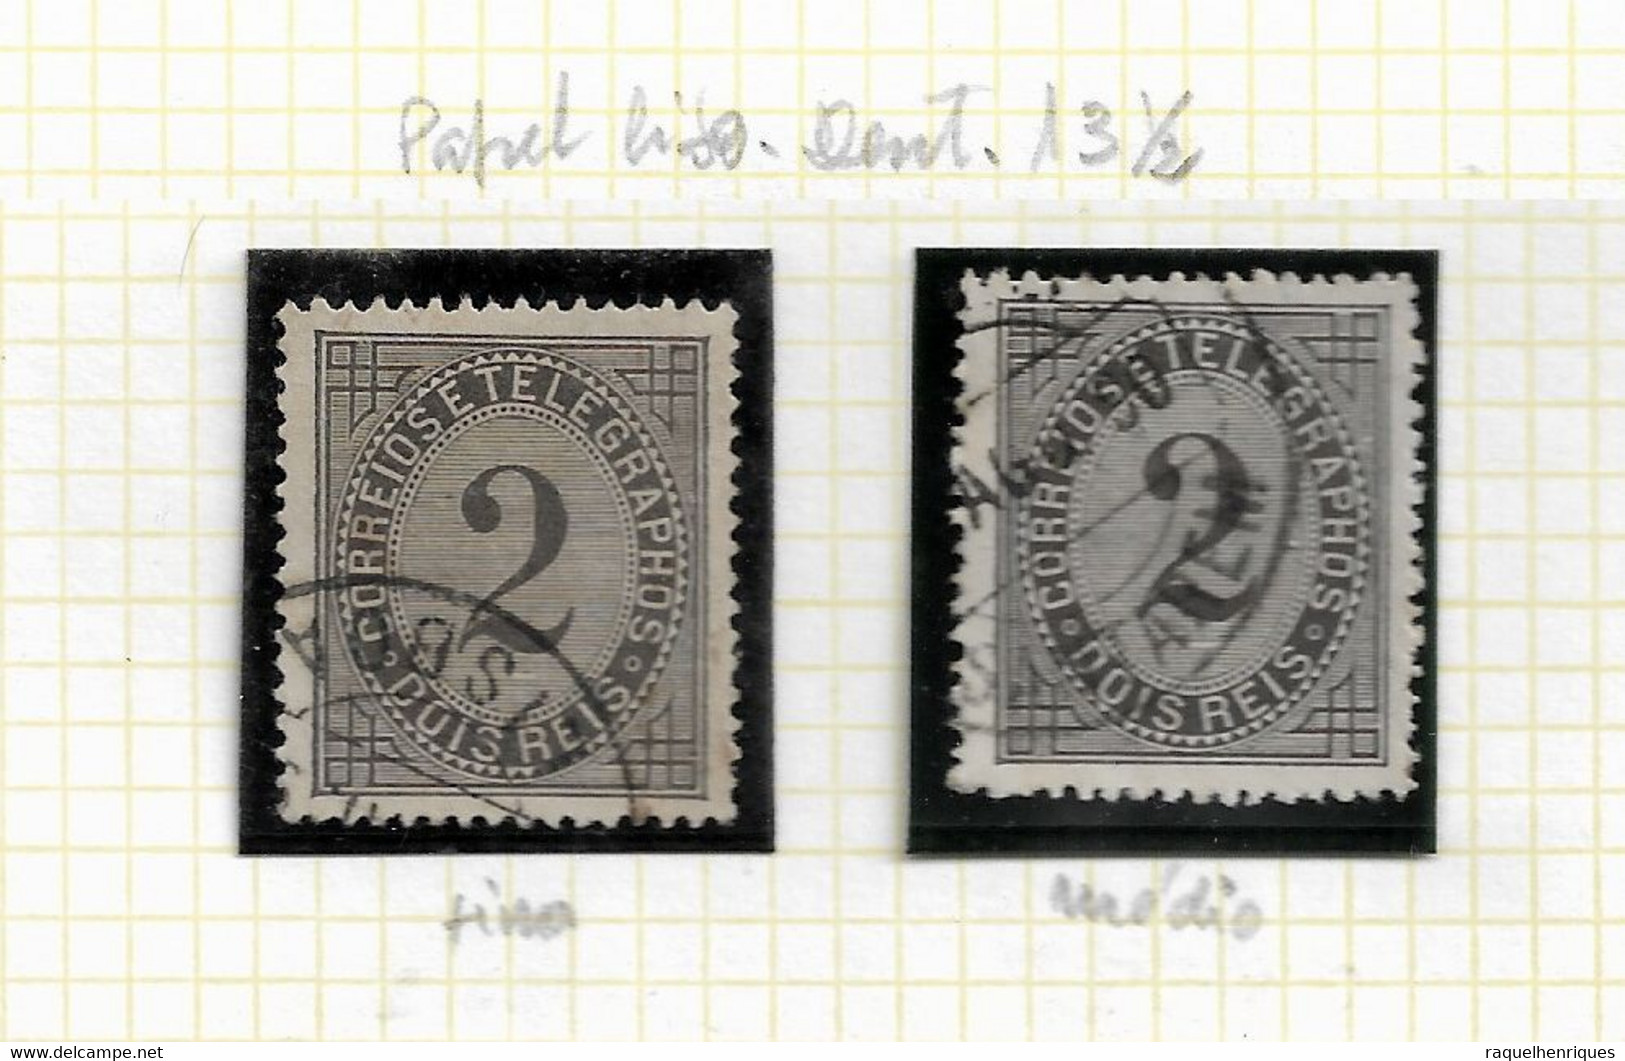 PORTUGAL STAMP - 1884 Telegraph Stamp P.LISO Perf:13½  Md#59a DIF. USED (LPT1#196) - Neufs